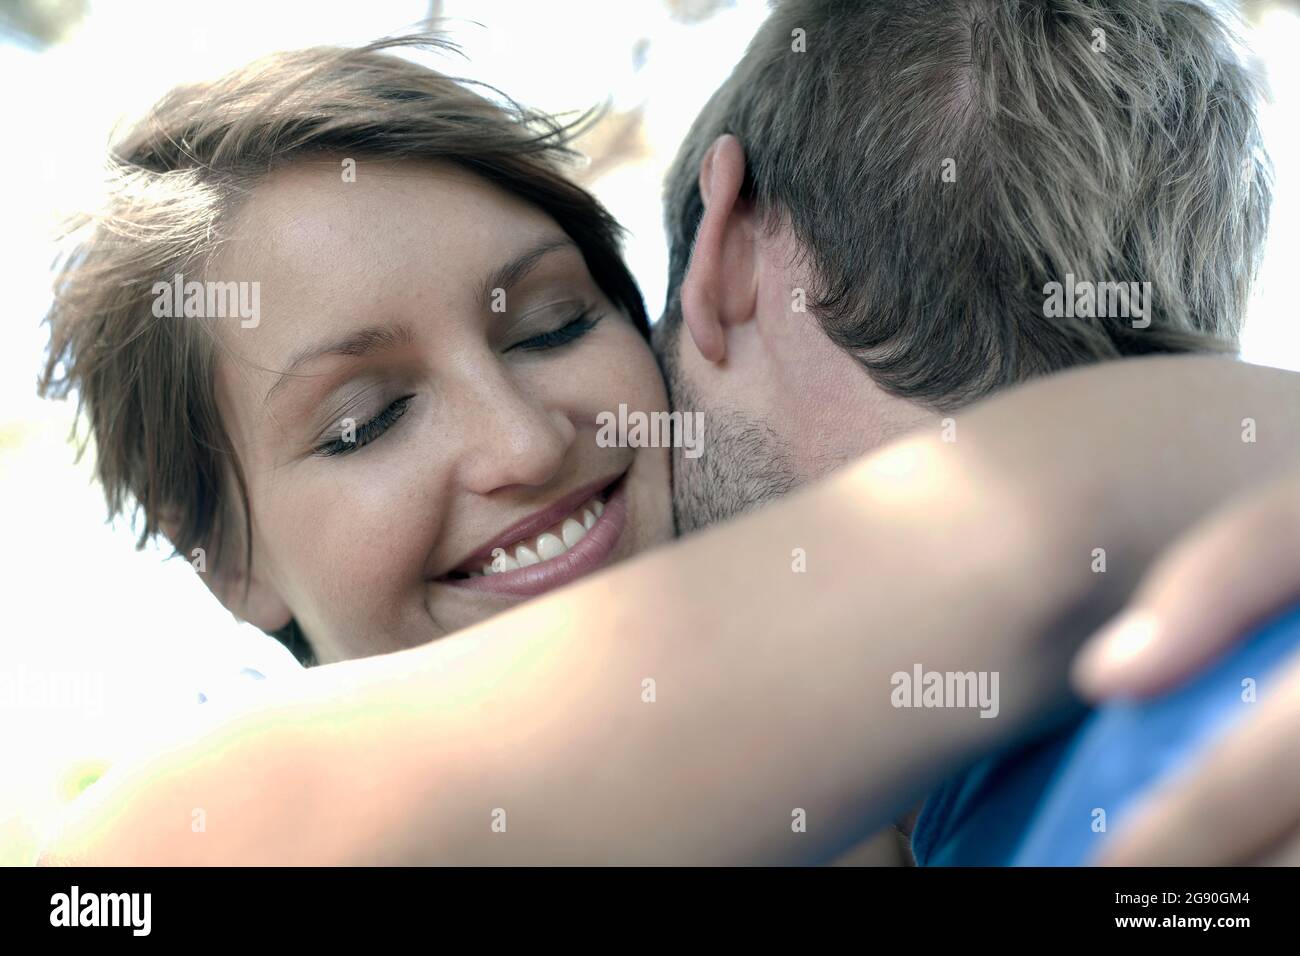 Smiling young woman with eyes closed embracing man at park Stock Photo